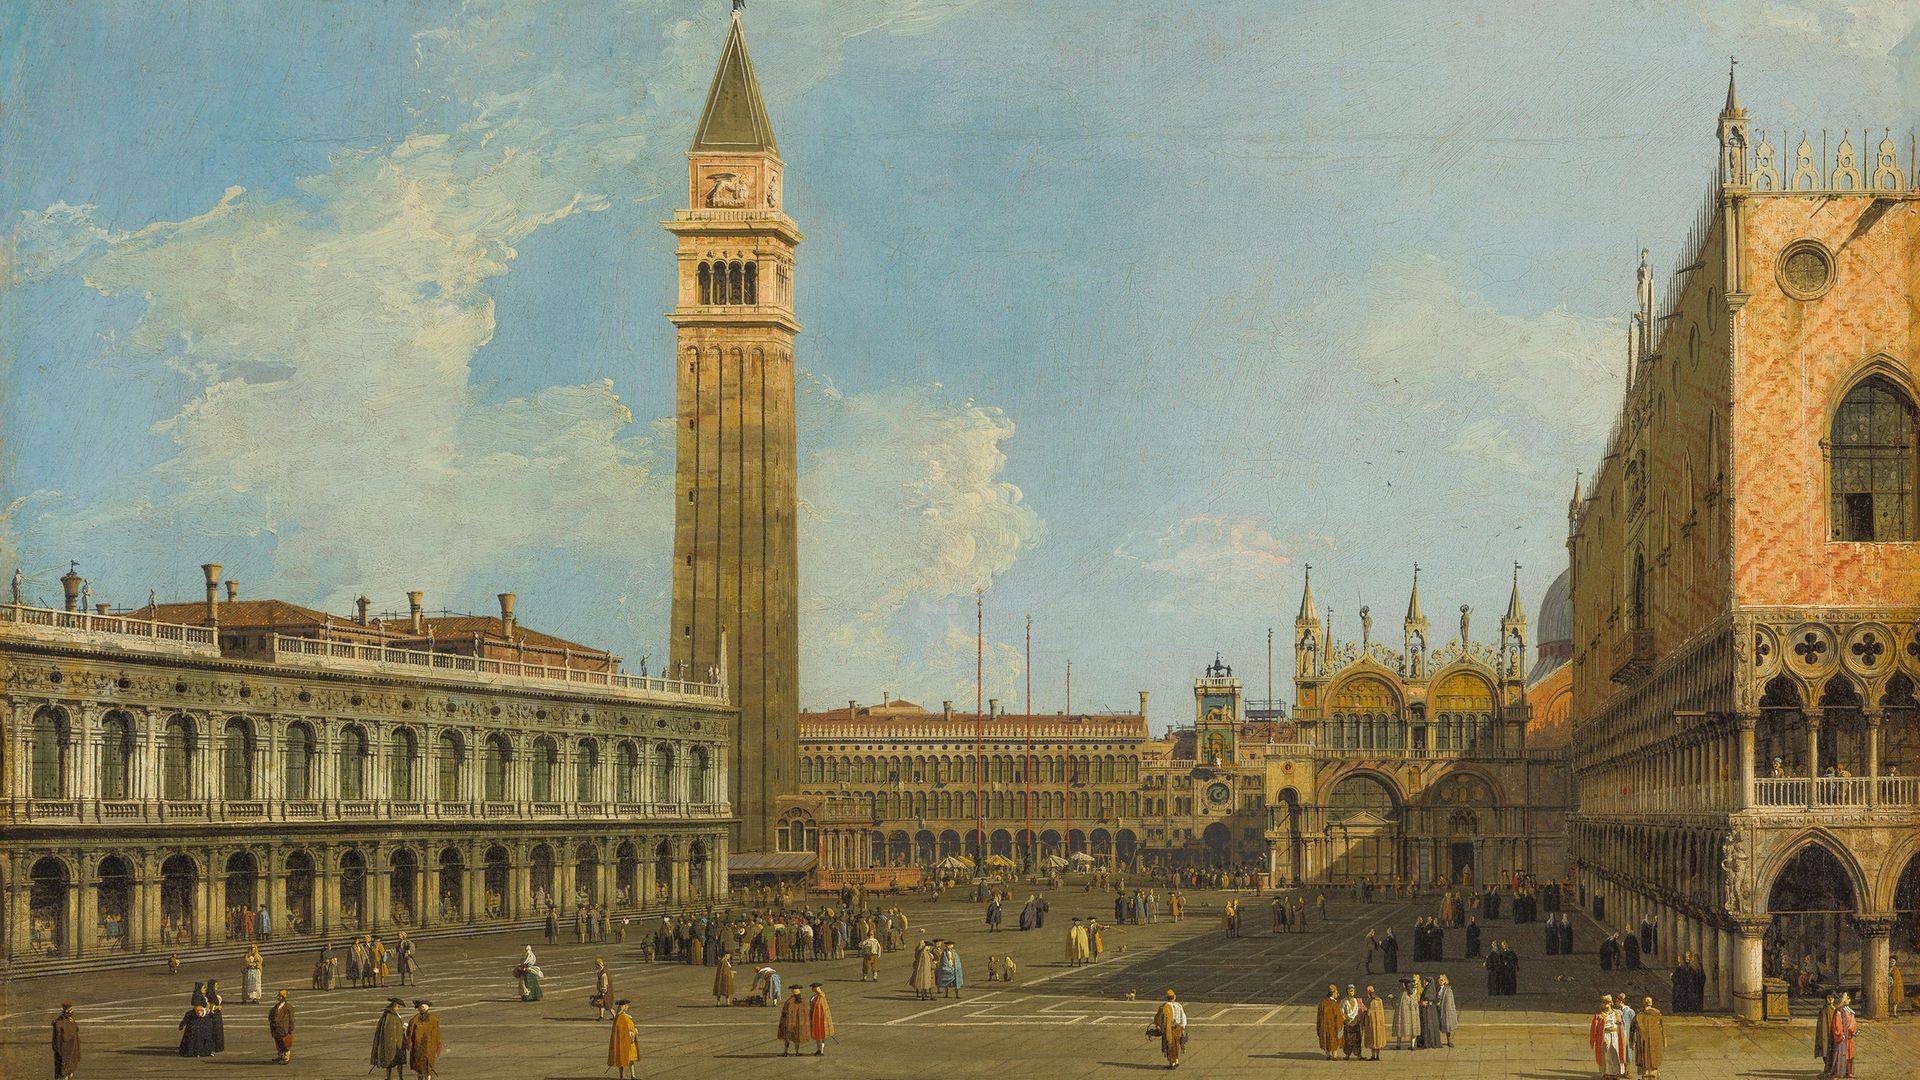 A new exhibition showcasing the works of Venetian artist Giovanni Antonio Canal, dubbed Canaletto, is set to open in Bath. - Credit: Mark Ivkovic